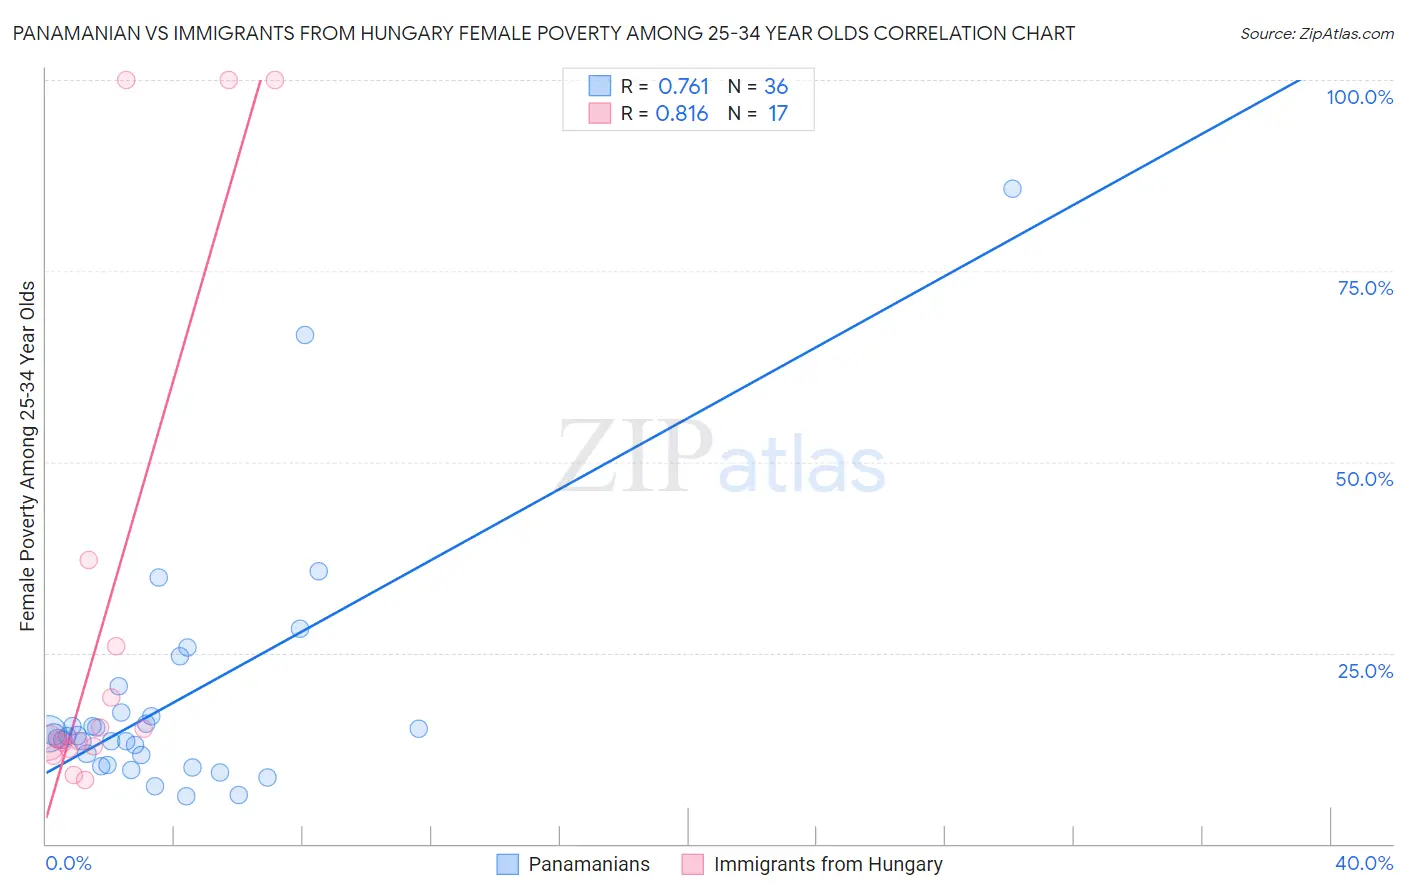 Panamanian vs Immigrants from Hungary Female Poverty Among 25-34 Year Olds